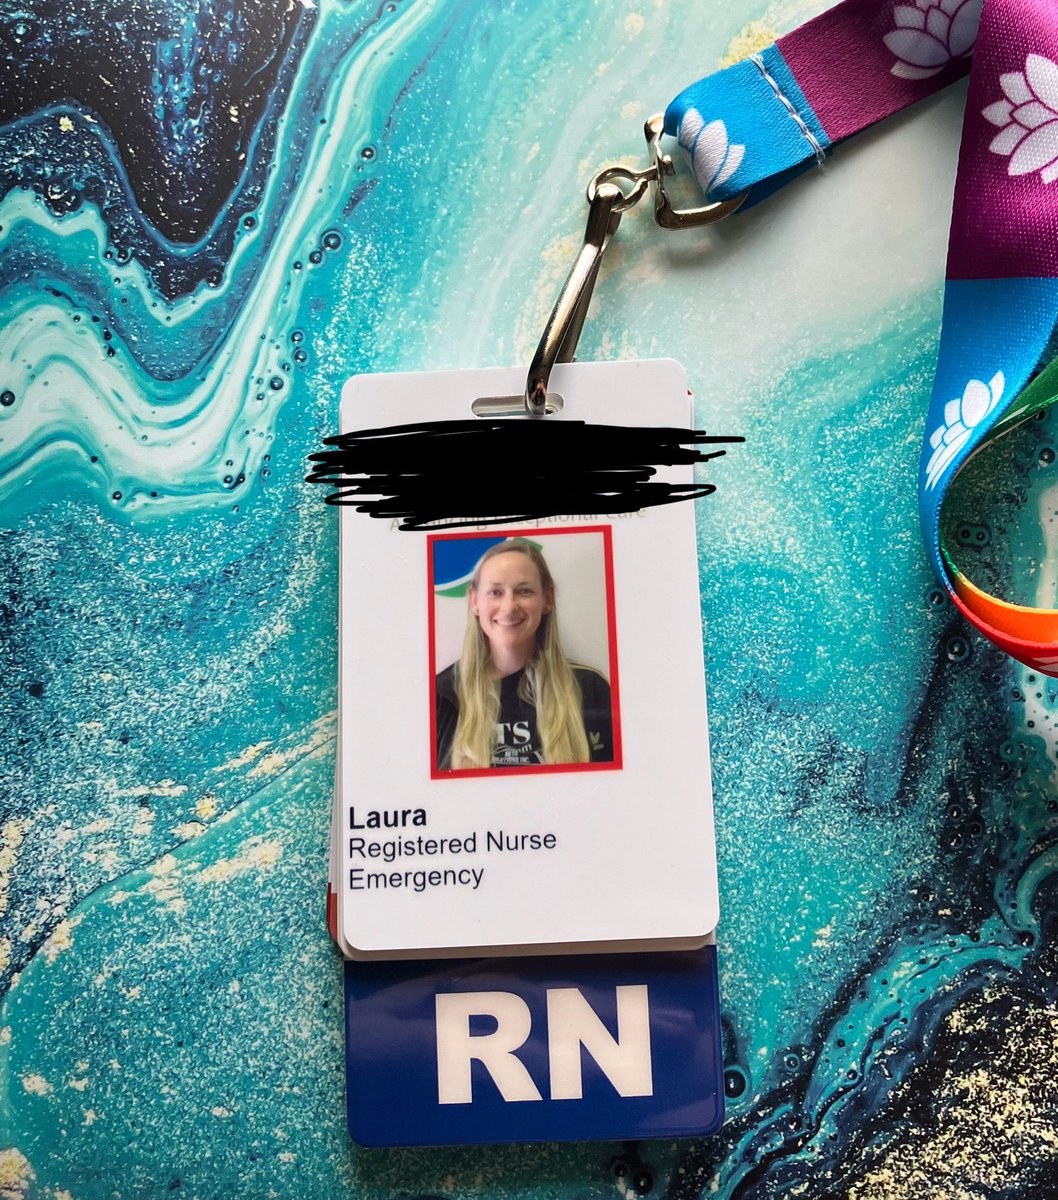 Today marks the first day and beginning of my new career as an RN. It was a long, challenging road to get here - but I made it! I am very proud of myself. 💉🩺#registerednurse #EmergencyMedicine